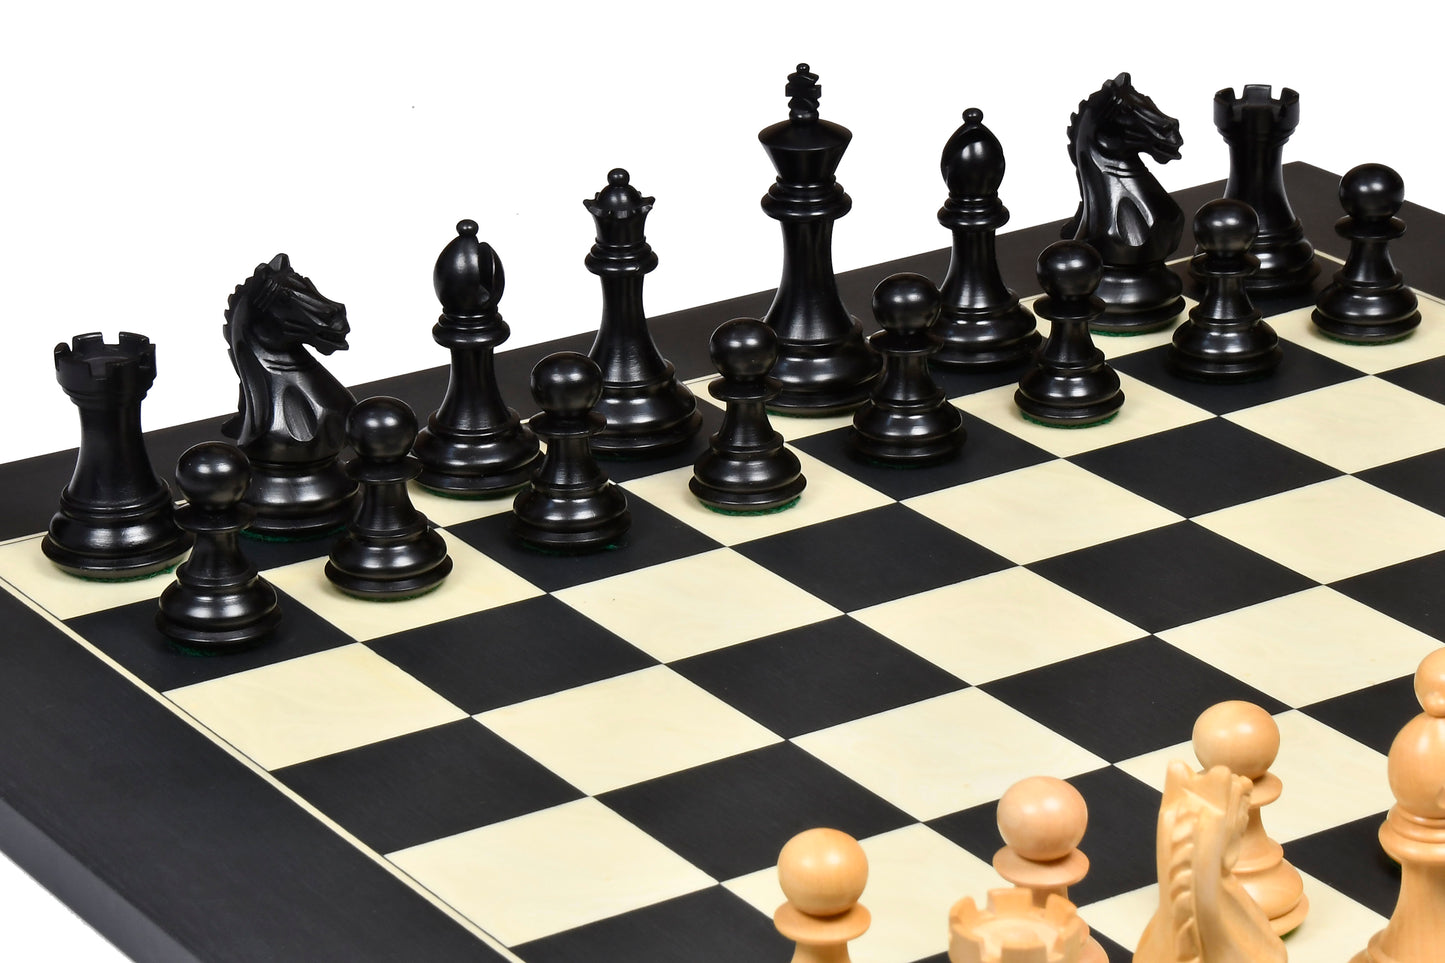 The Fierce Knight Staunton Wooden Chess Pieces in Indian Ebonized Wood & Box Wood - 3.5" King